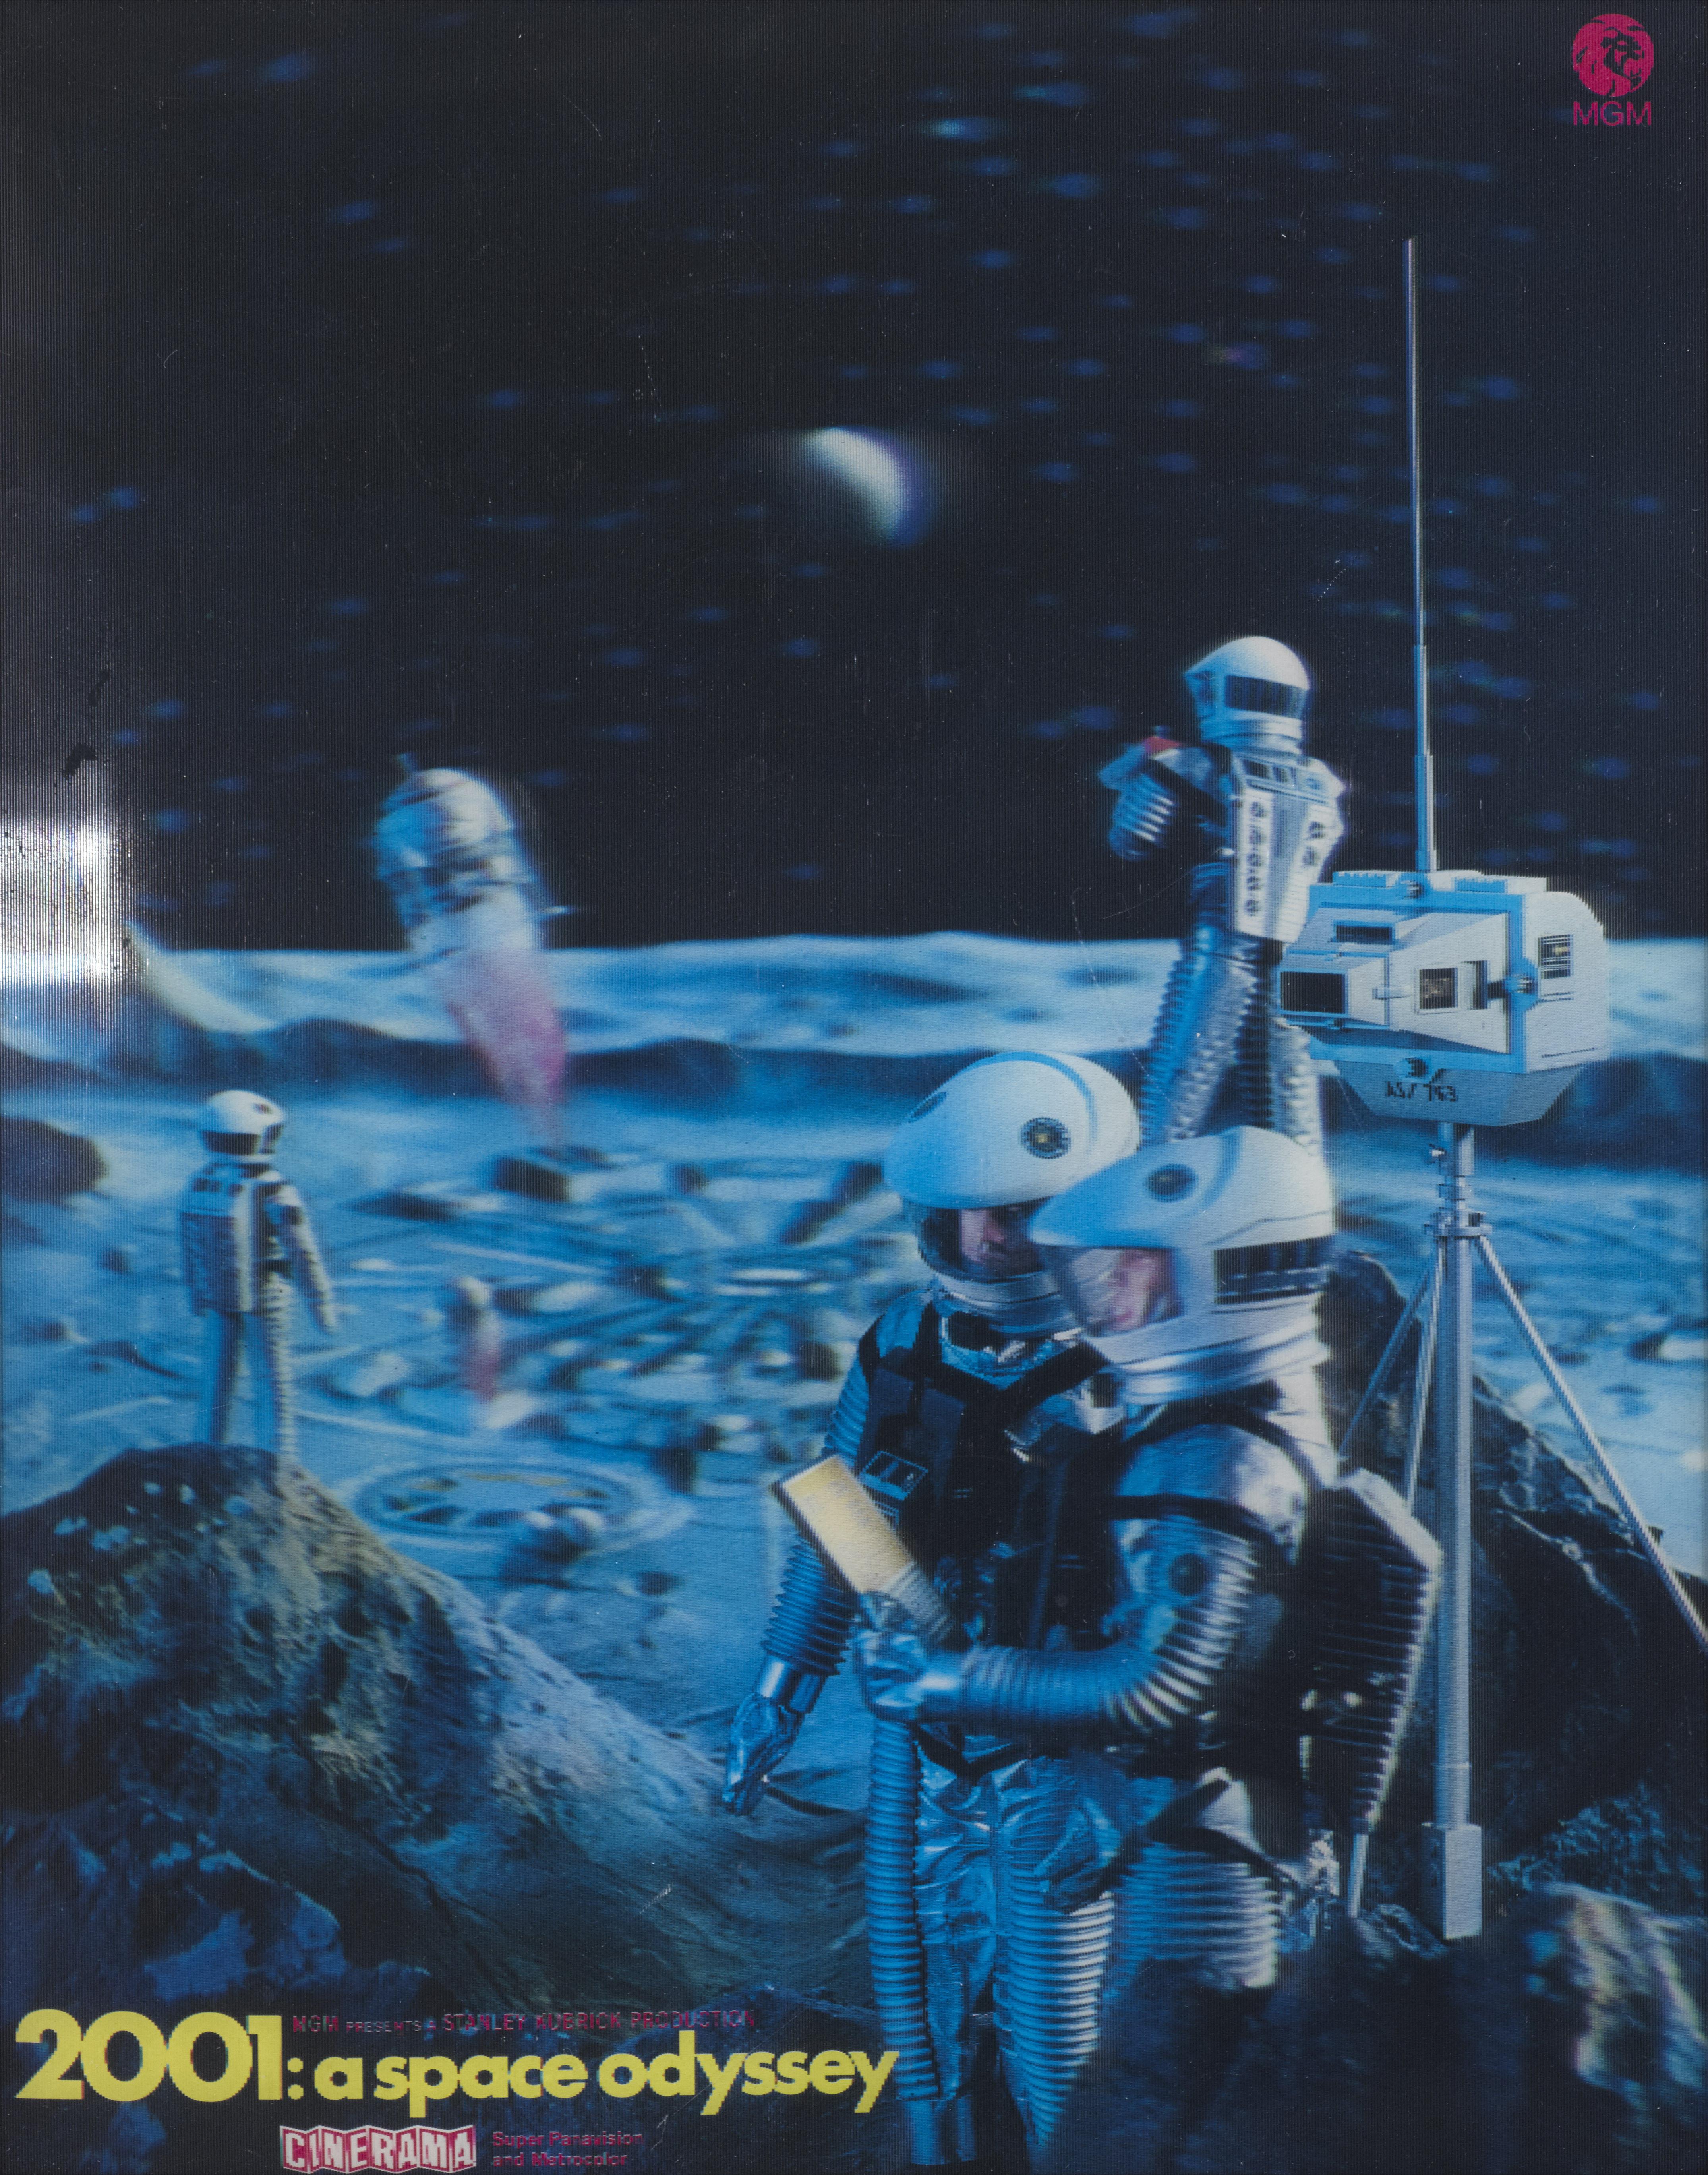 Original US Cinerama 3-D holographic display for Stanley Kubrick's 2001: A Space Odyssey.
MGM really went to town on the marketing of this film, and produced special 3-D holographic displays for the Cinerama release of the film. This release was a